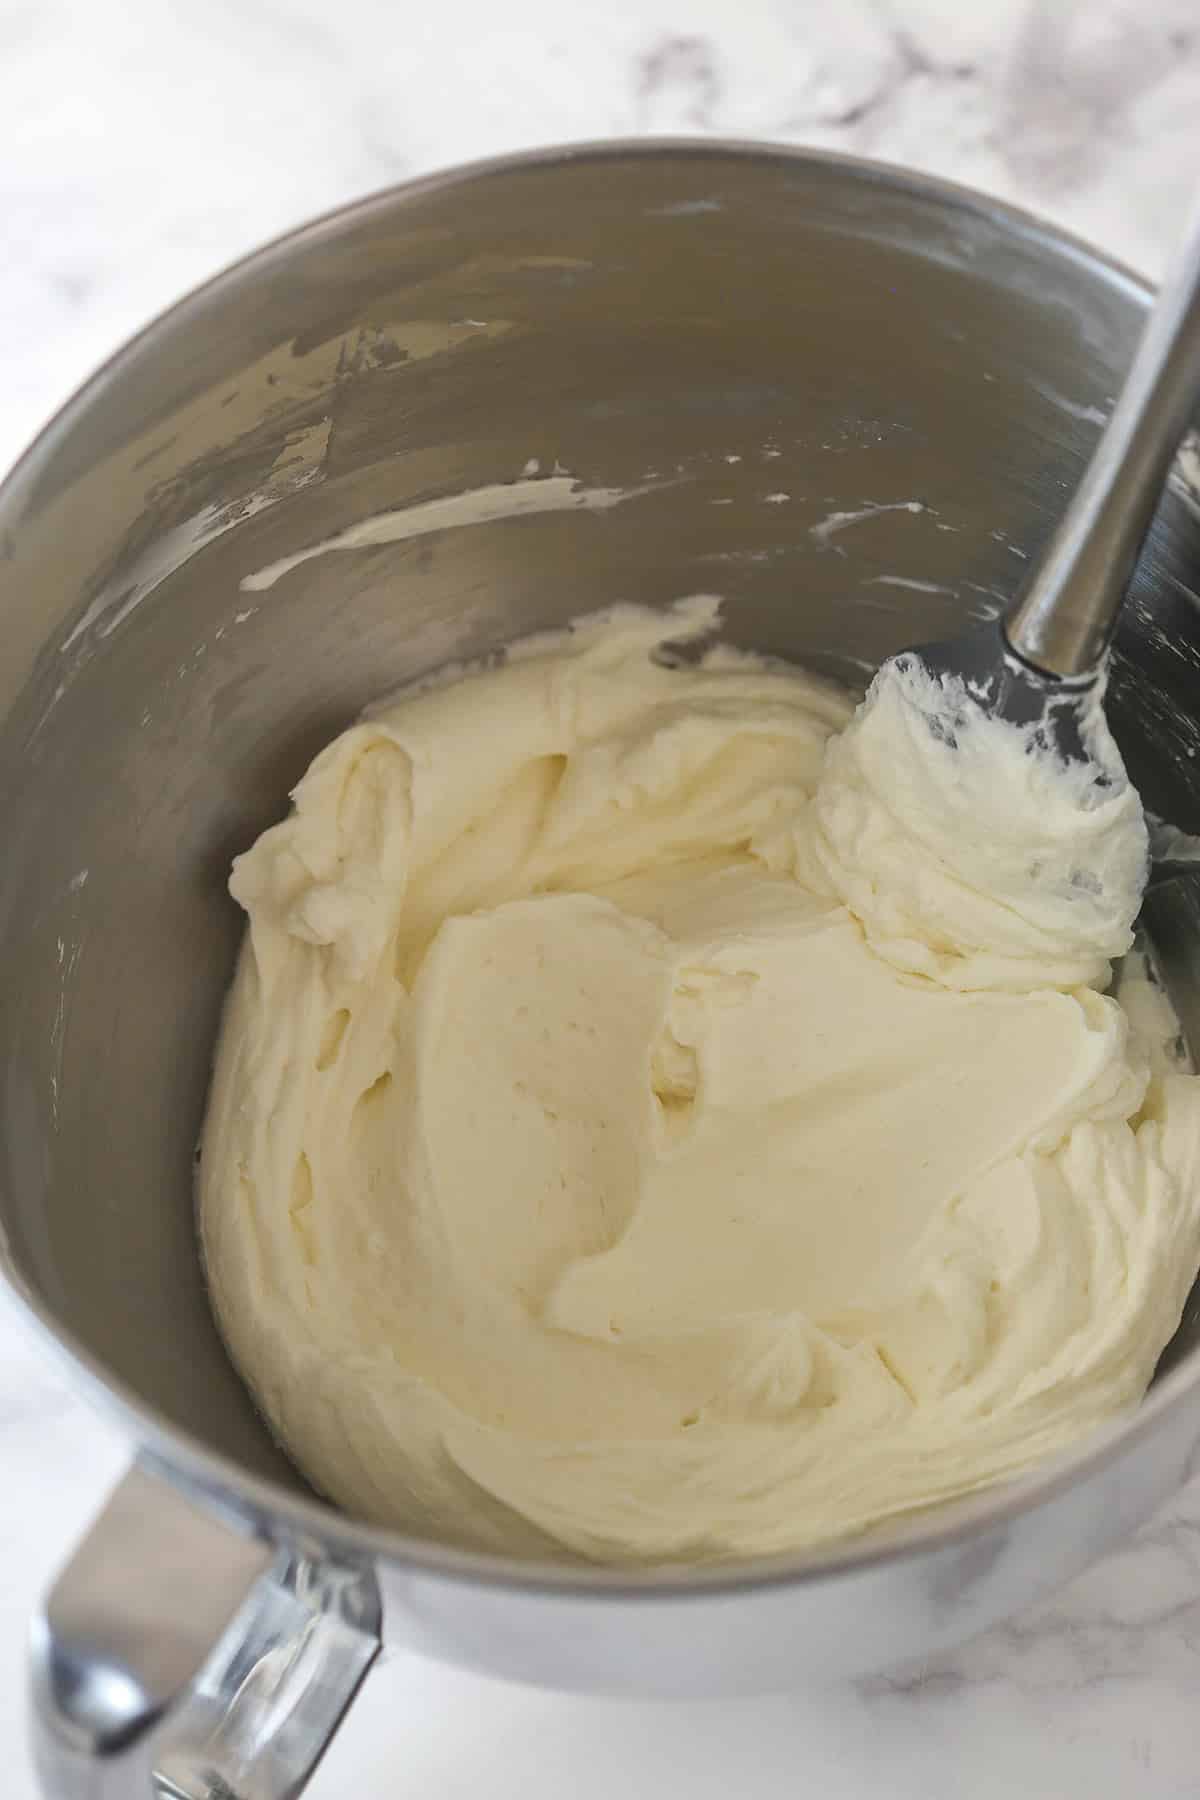 Whipped cream frosting in a mixing bowl.